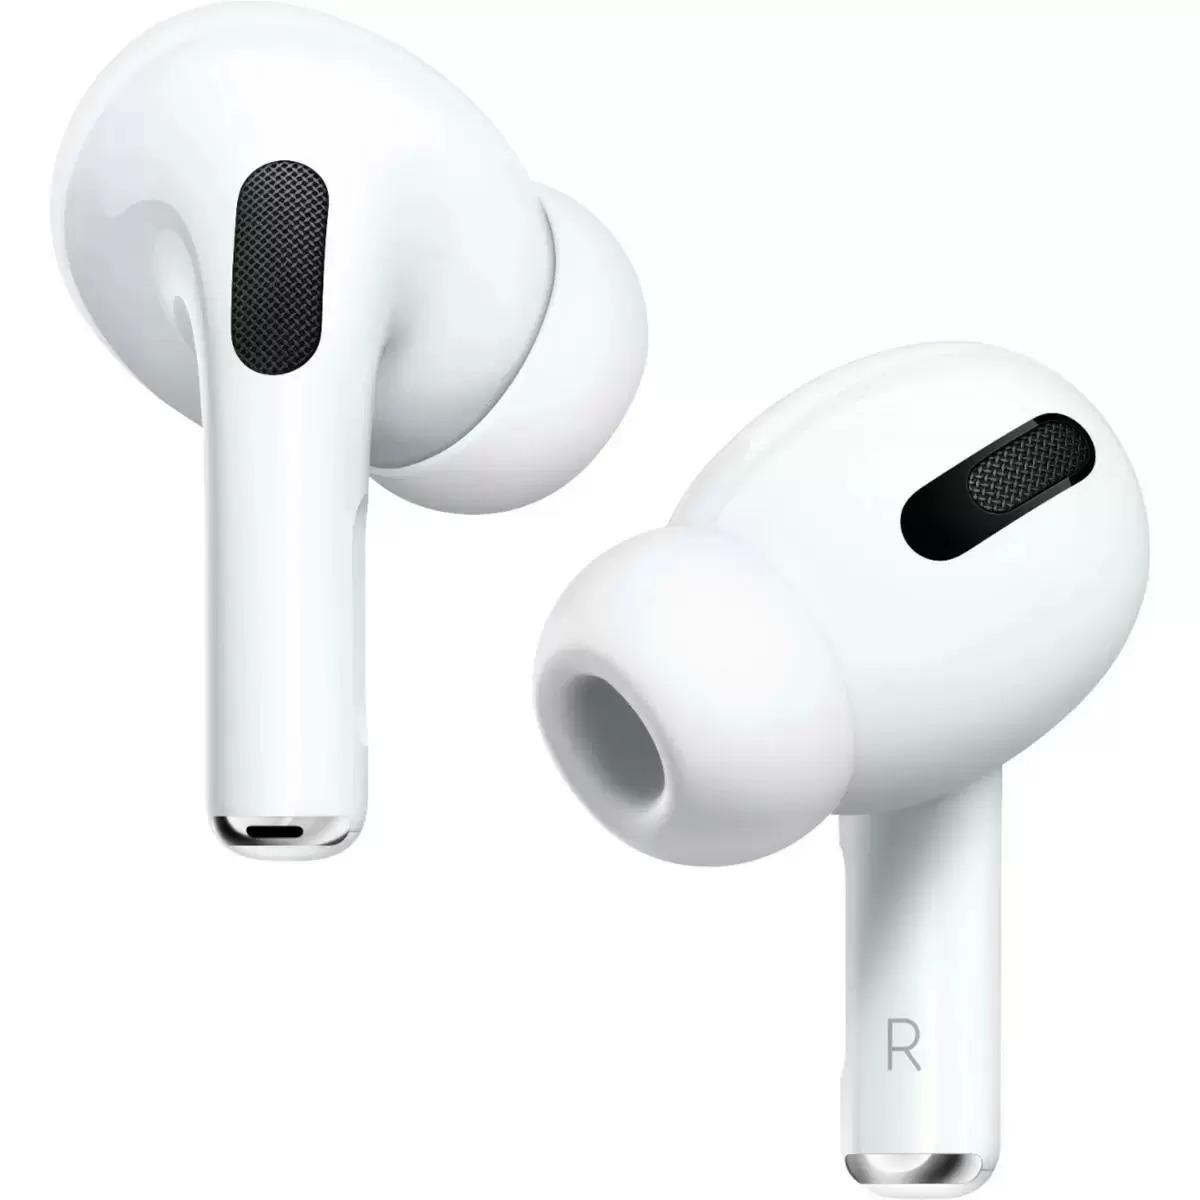 Apple AirPods Pro 2nd Gen Refurbished for $144.99 Shipped